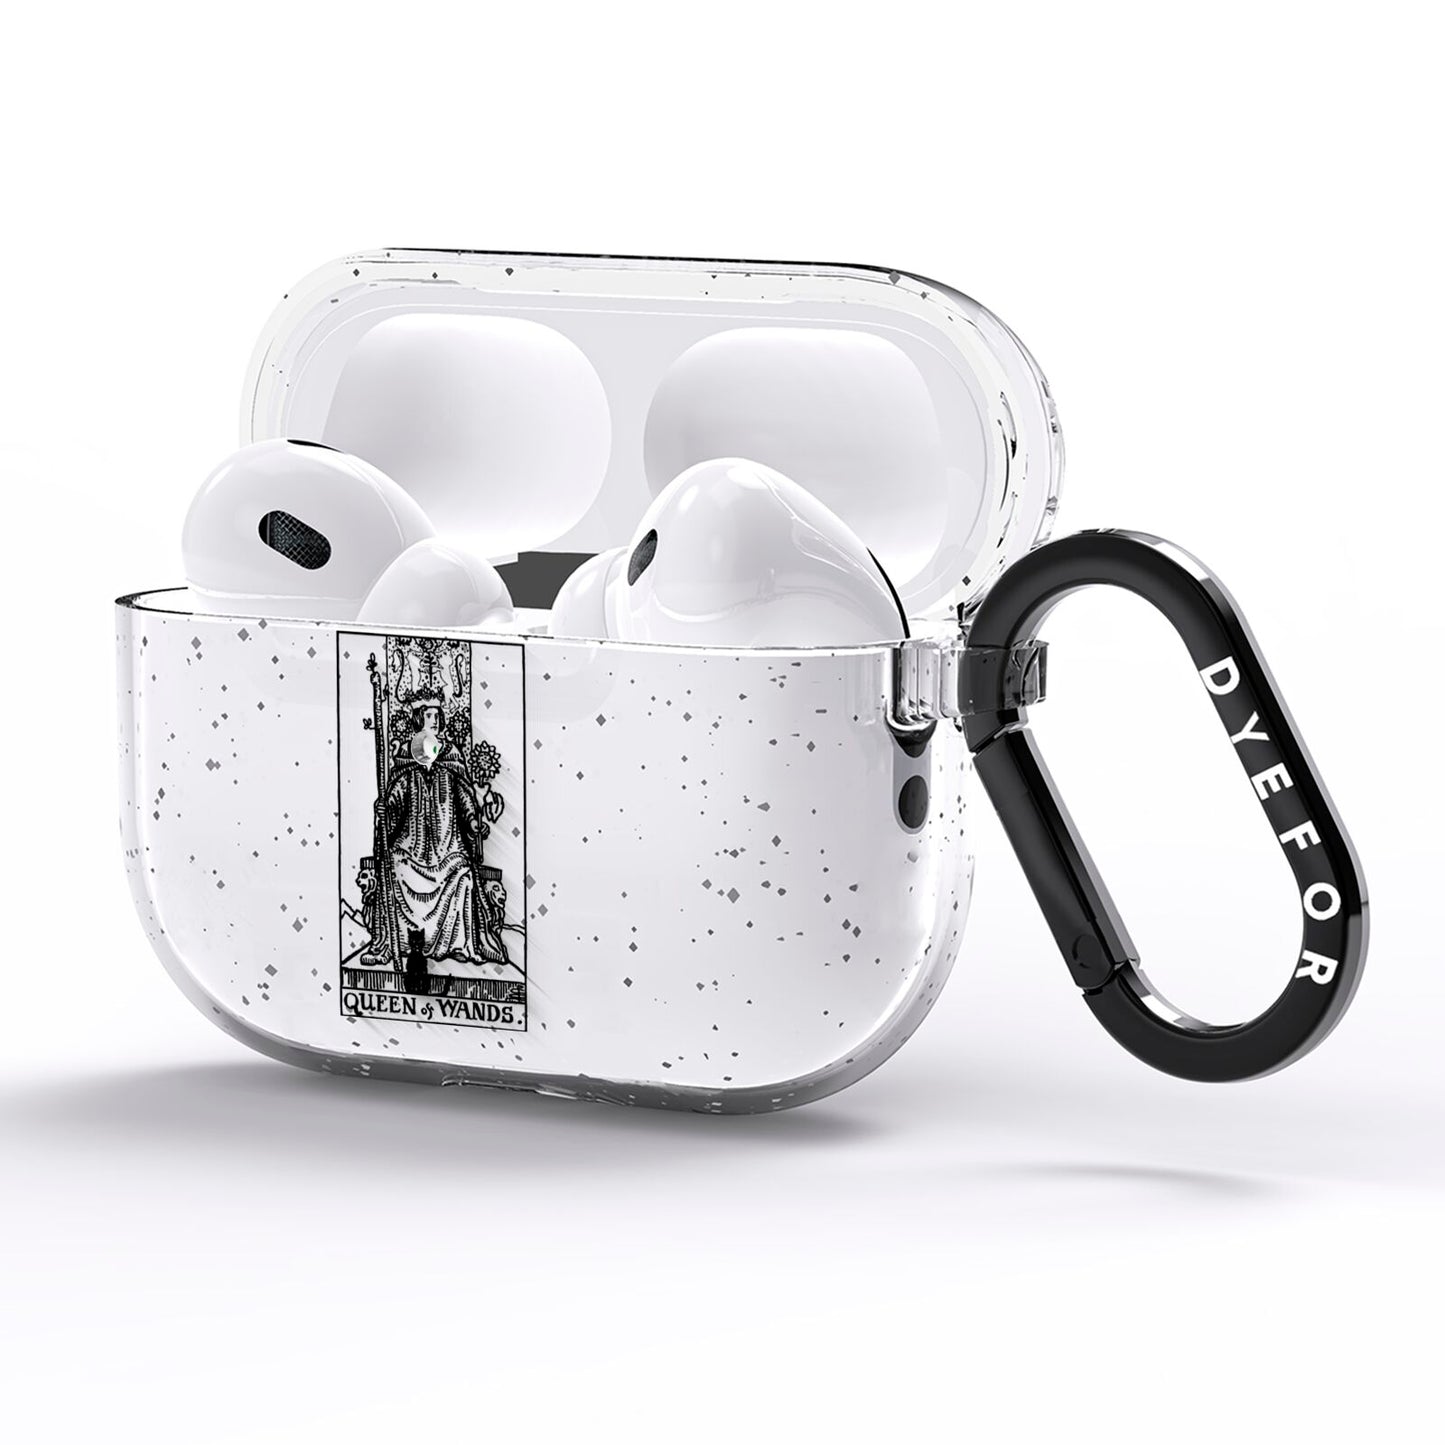 Queen of Wands Monochrome AirPods Pro Glitter Case Side Image